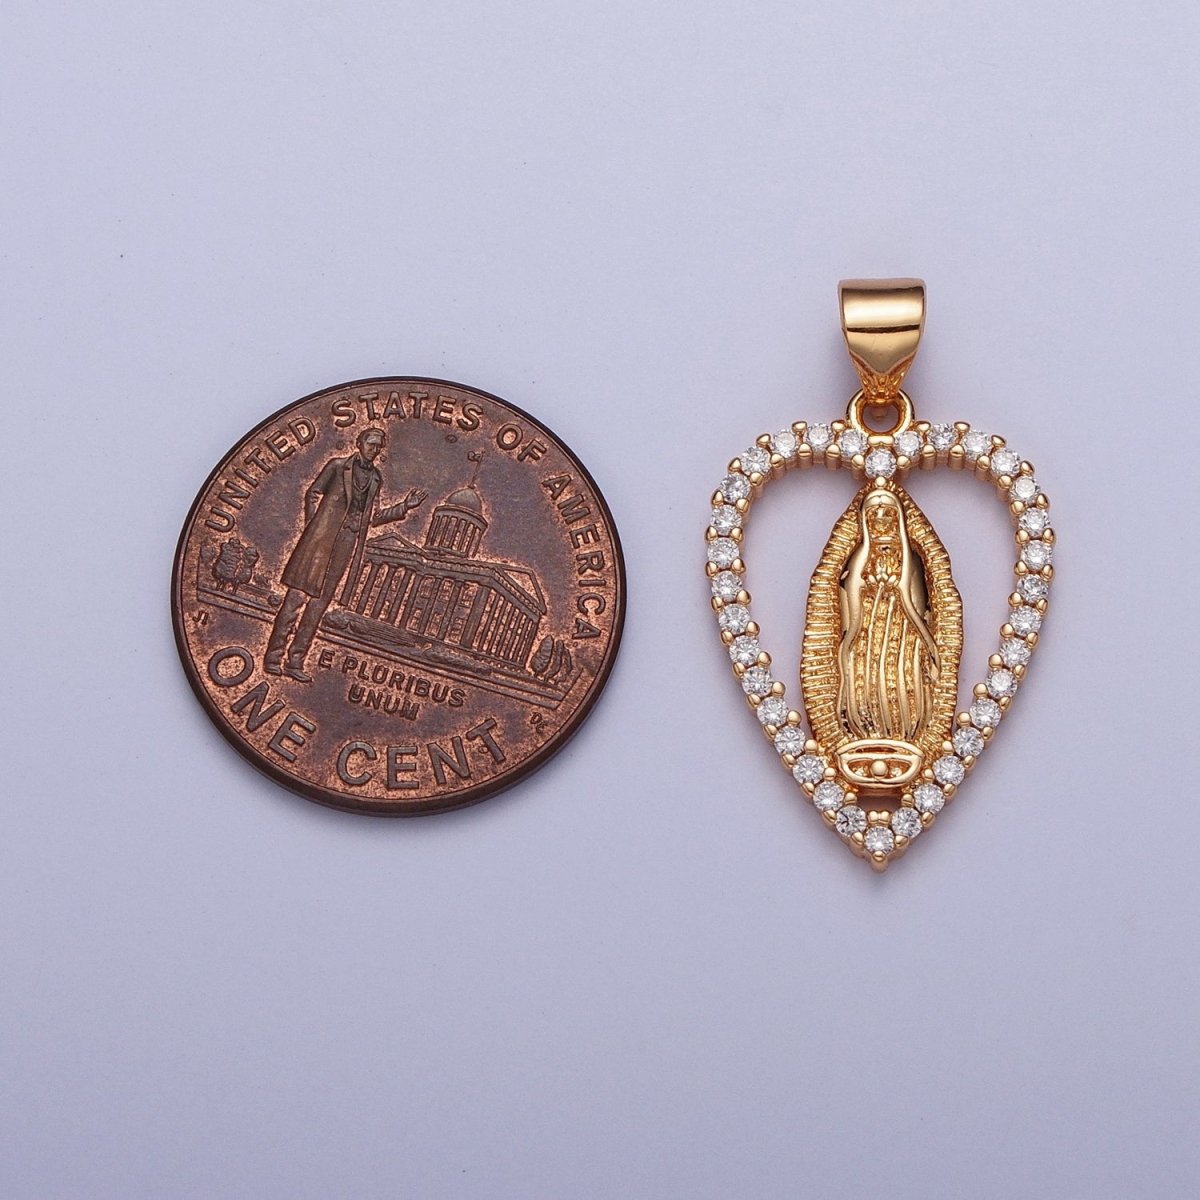 Micro Pave Gold Heart Medallion Lady Guadalupe Pendant Virgin Mary Charm for Catholic Religious Jewelry Making - DLUXCA